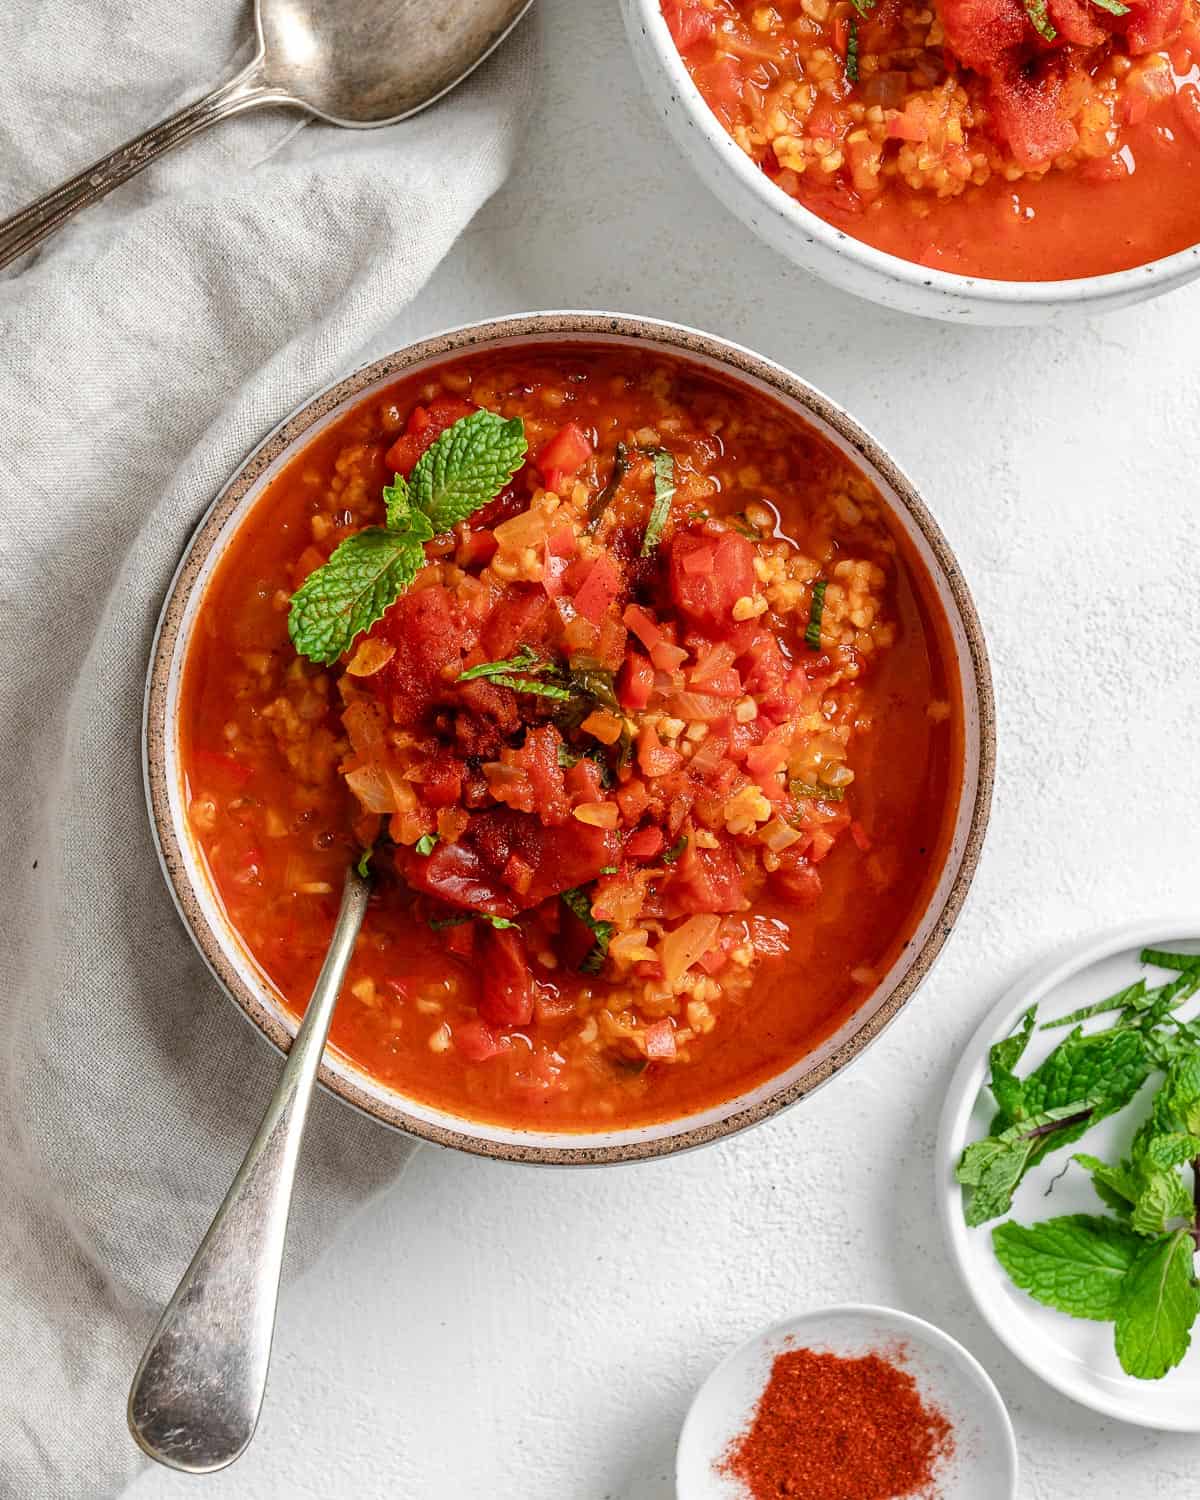 completed Turkish Tomato, Bulgur, and Red Pepper Soup in a bowl against a white surface with herbs and extra soup in the background